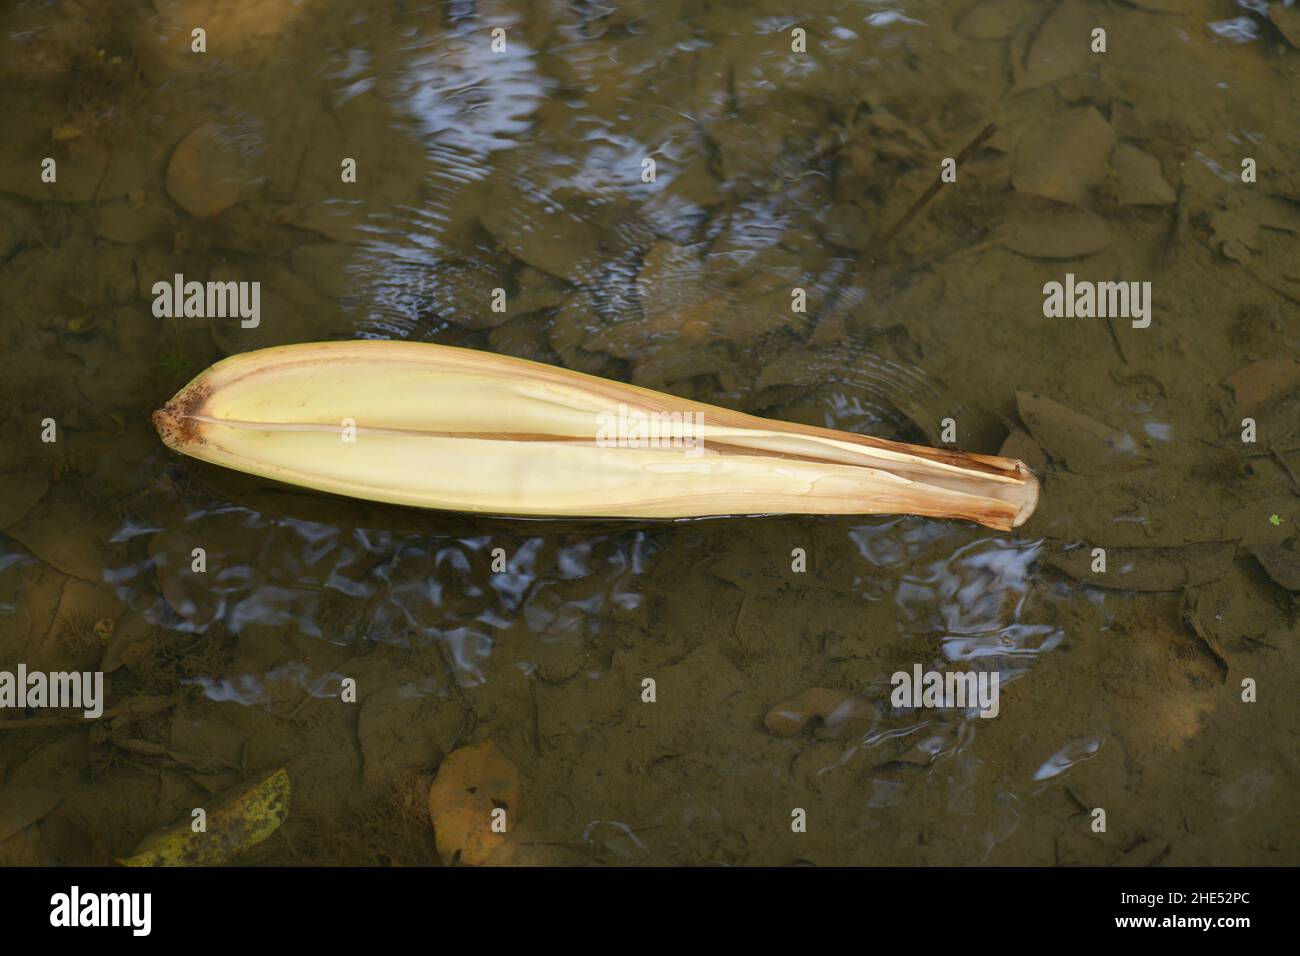 Areca Nut Flower Cover - Playing Boat Stock Photo